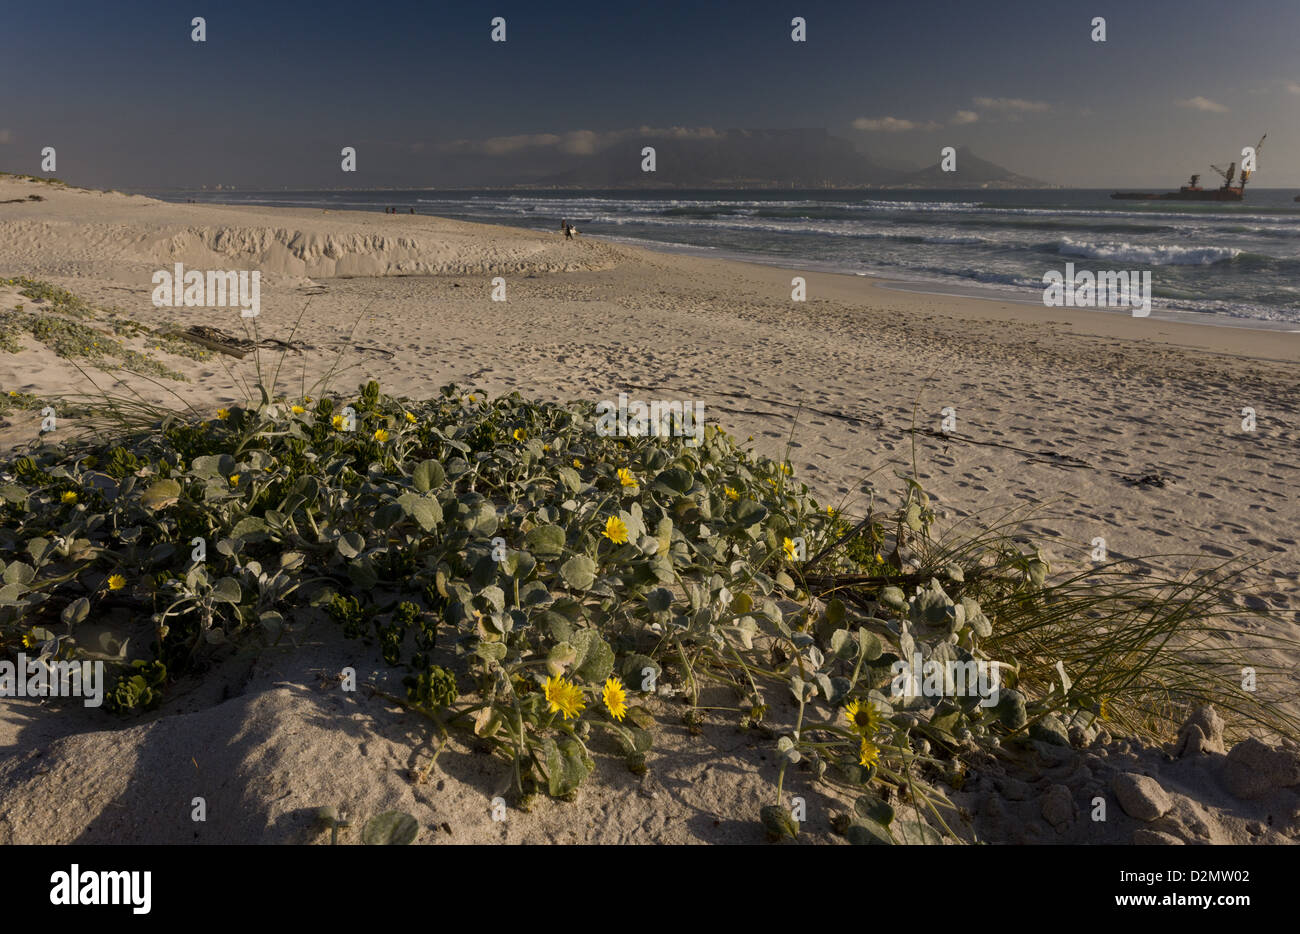 Beach daisy (Arctotheca populifolia) in flower on dunes at Cape Town, South Africa Stock Photo